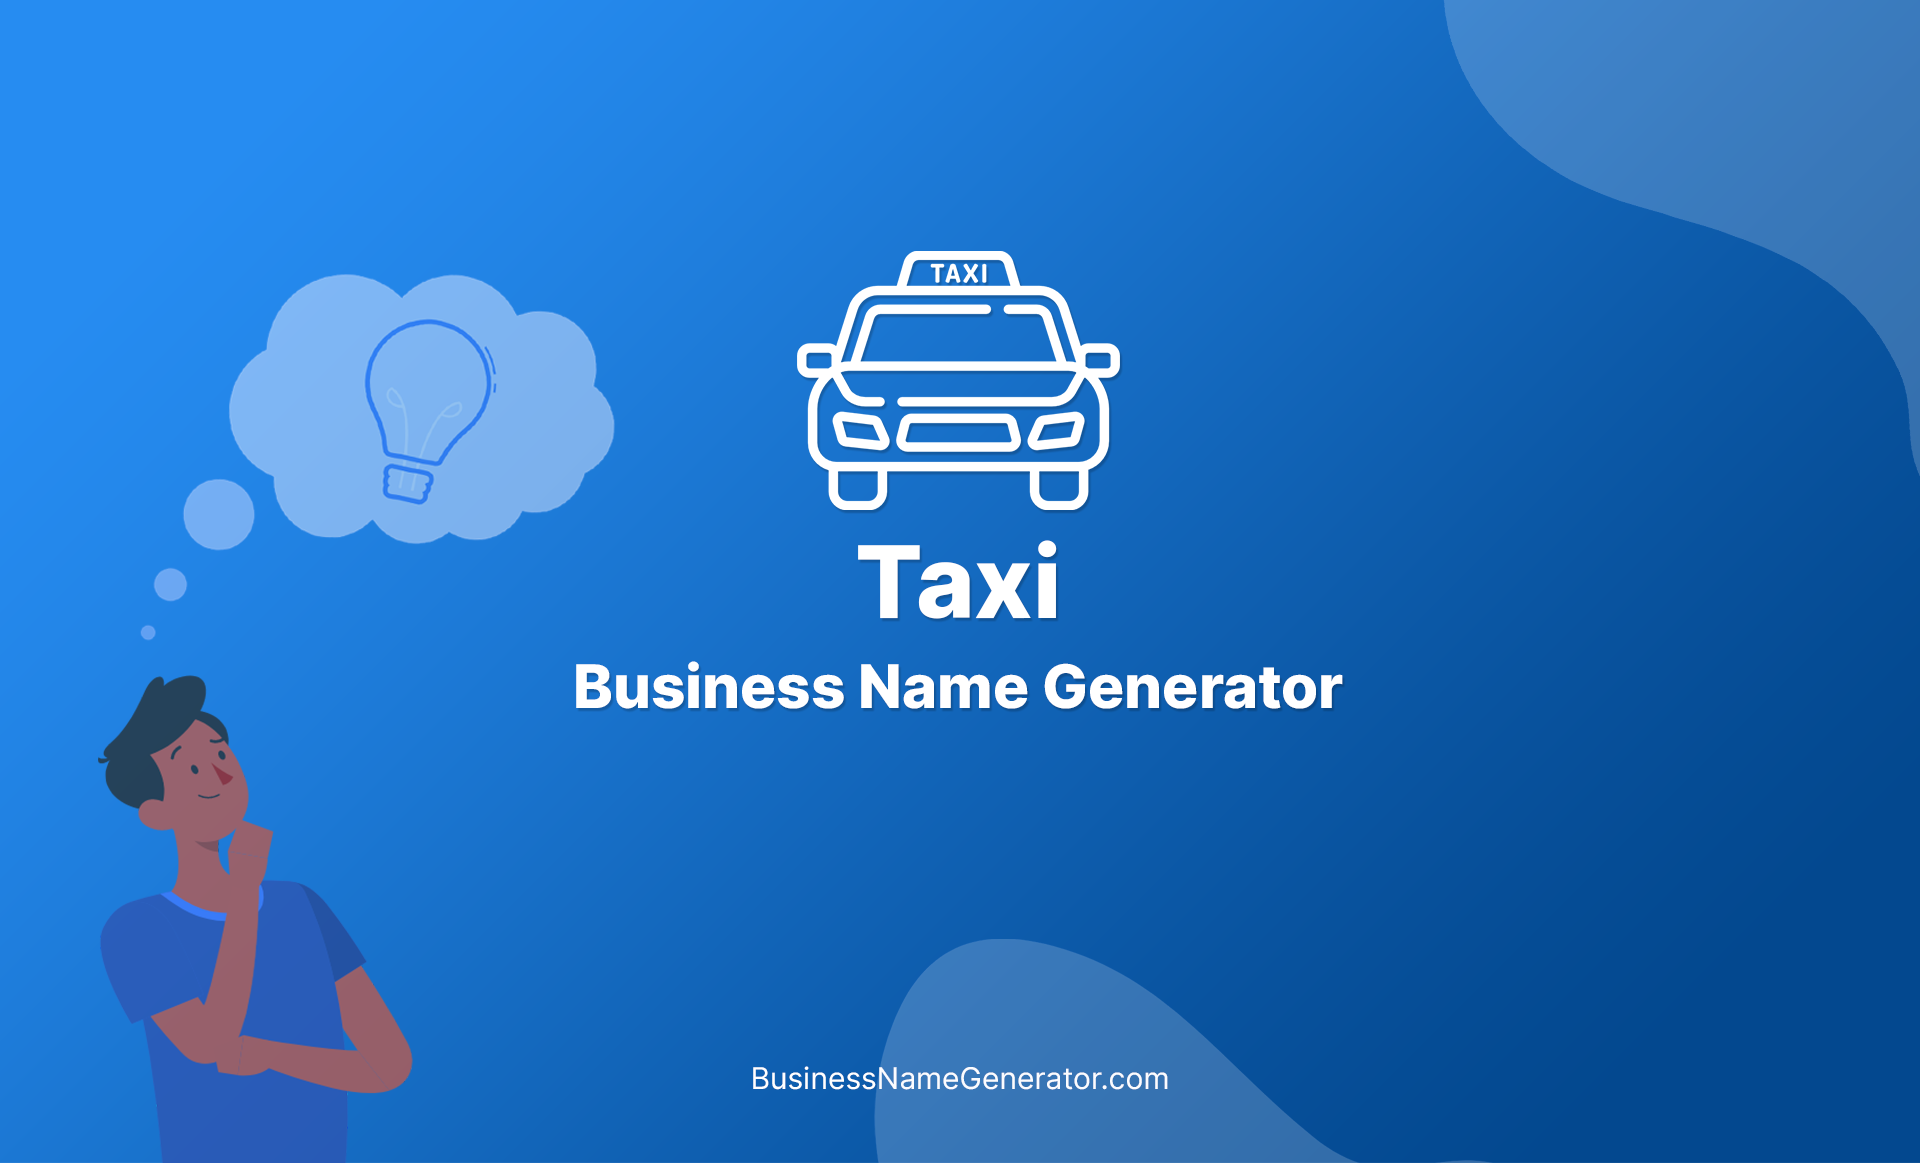 Taxi Business Name Generator